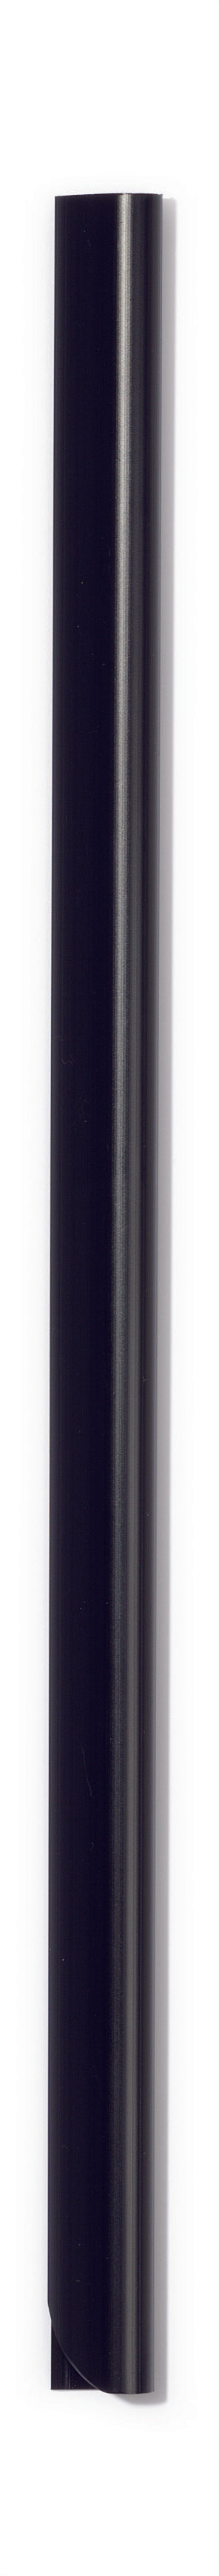 Durable Spine Bar A4 6mm Black (Pack 100) 290101 - NWT FM SOLUTIONS - YOUR CATERING WHOLESALER